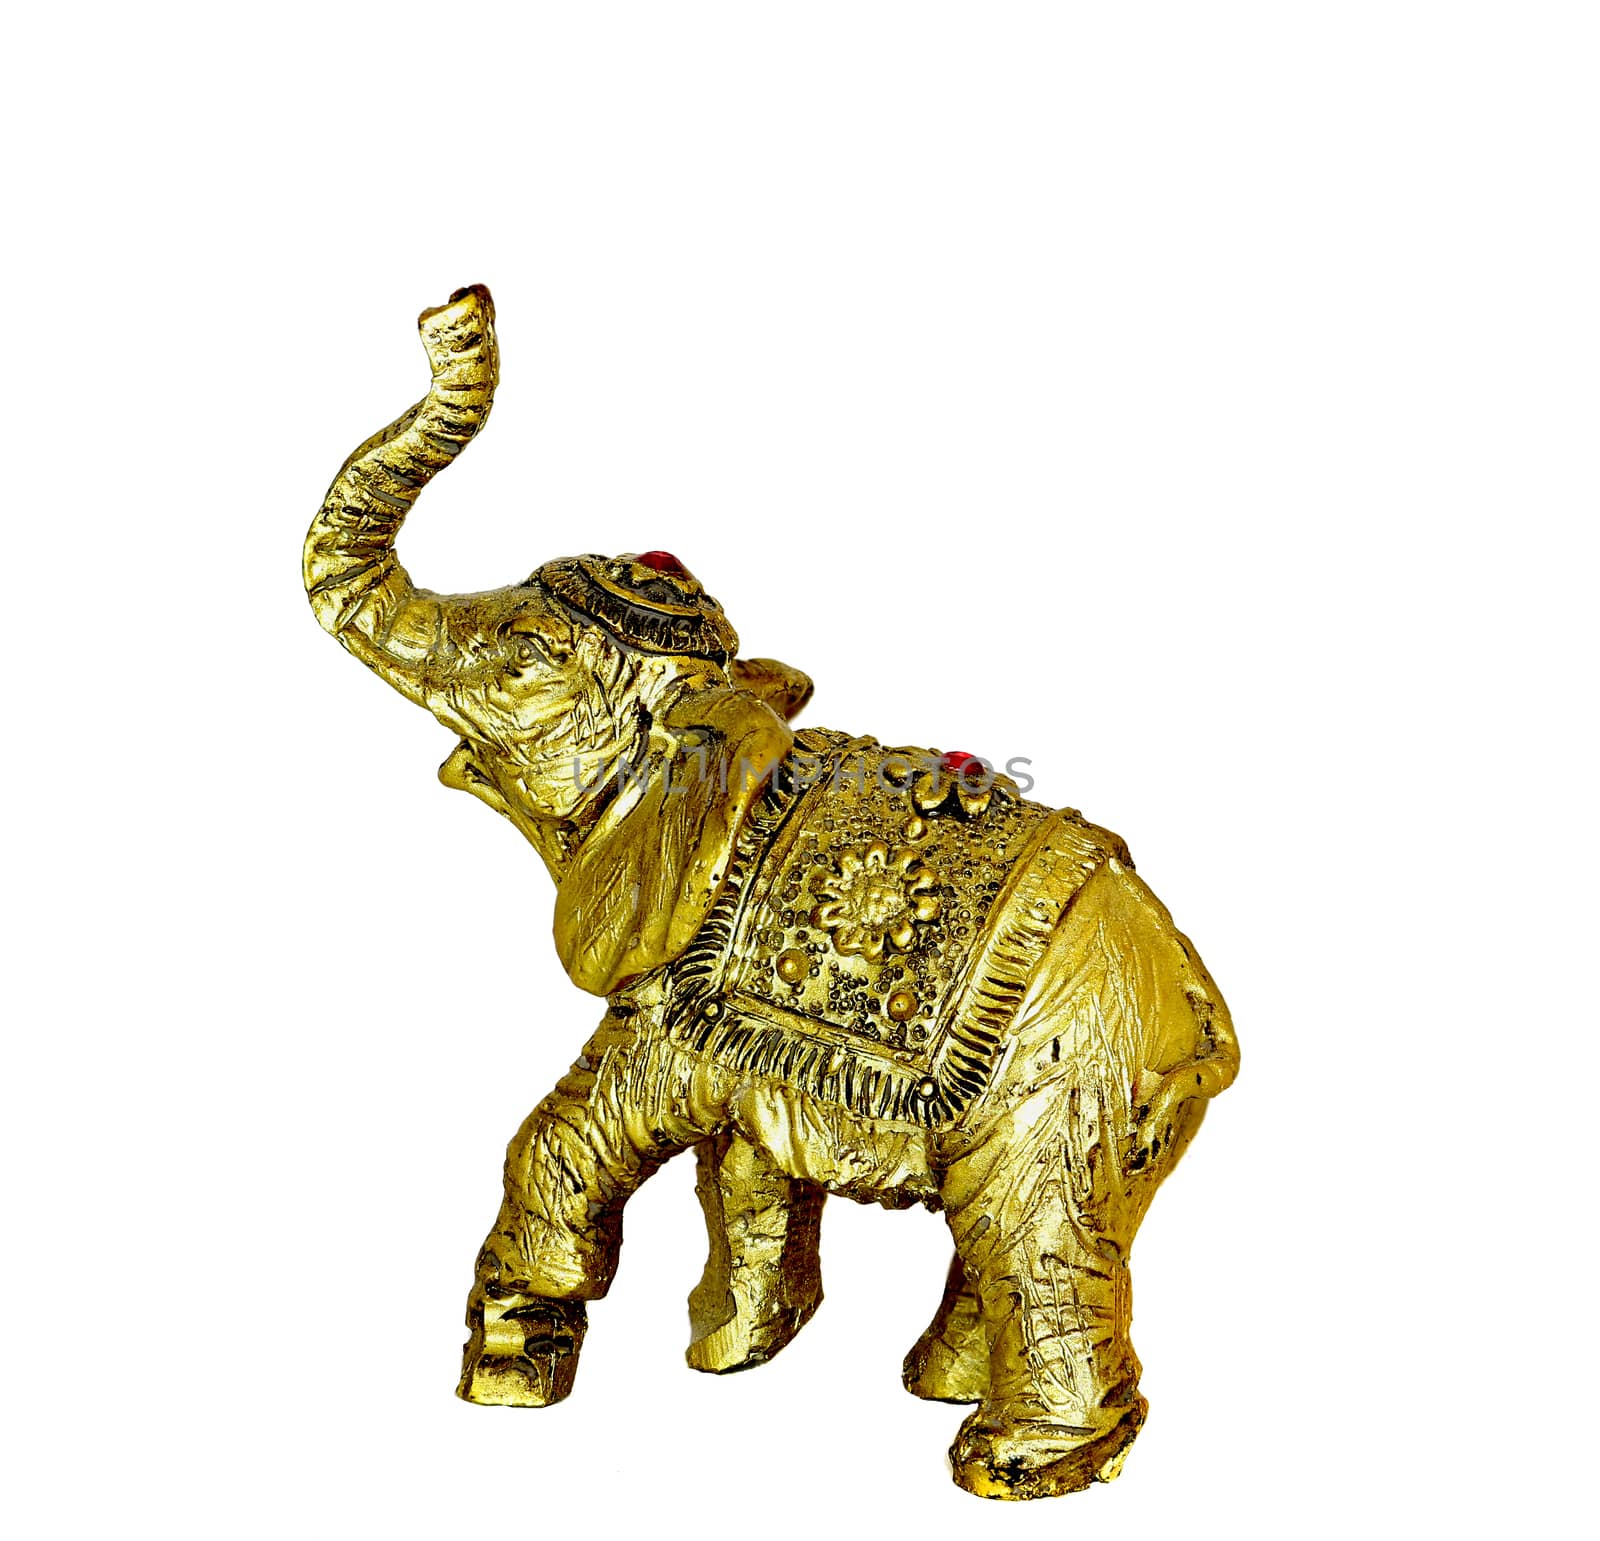 Elephant Gold Figure on a white background by gstalker